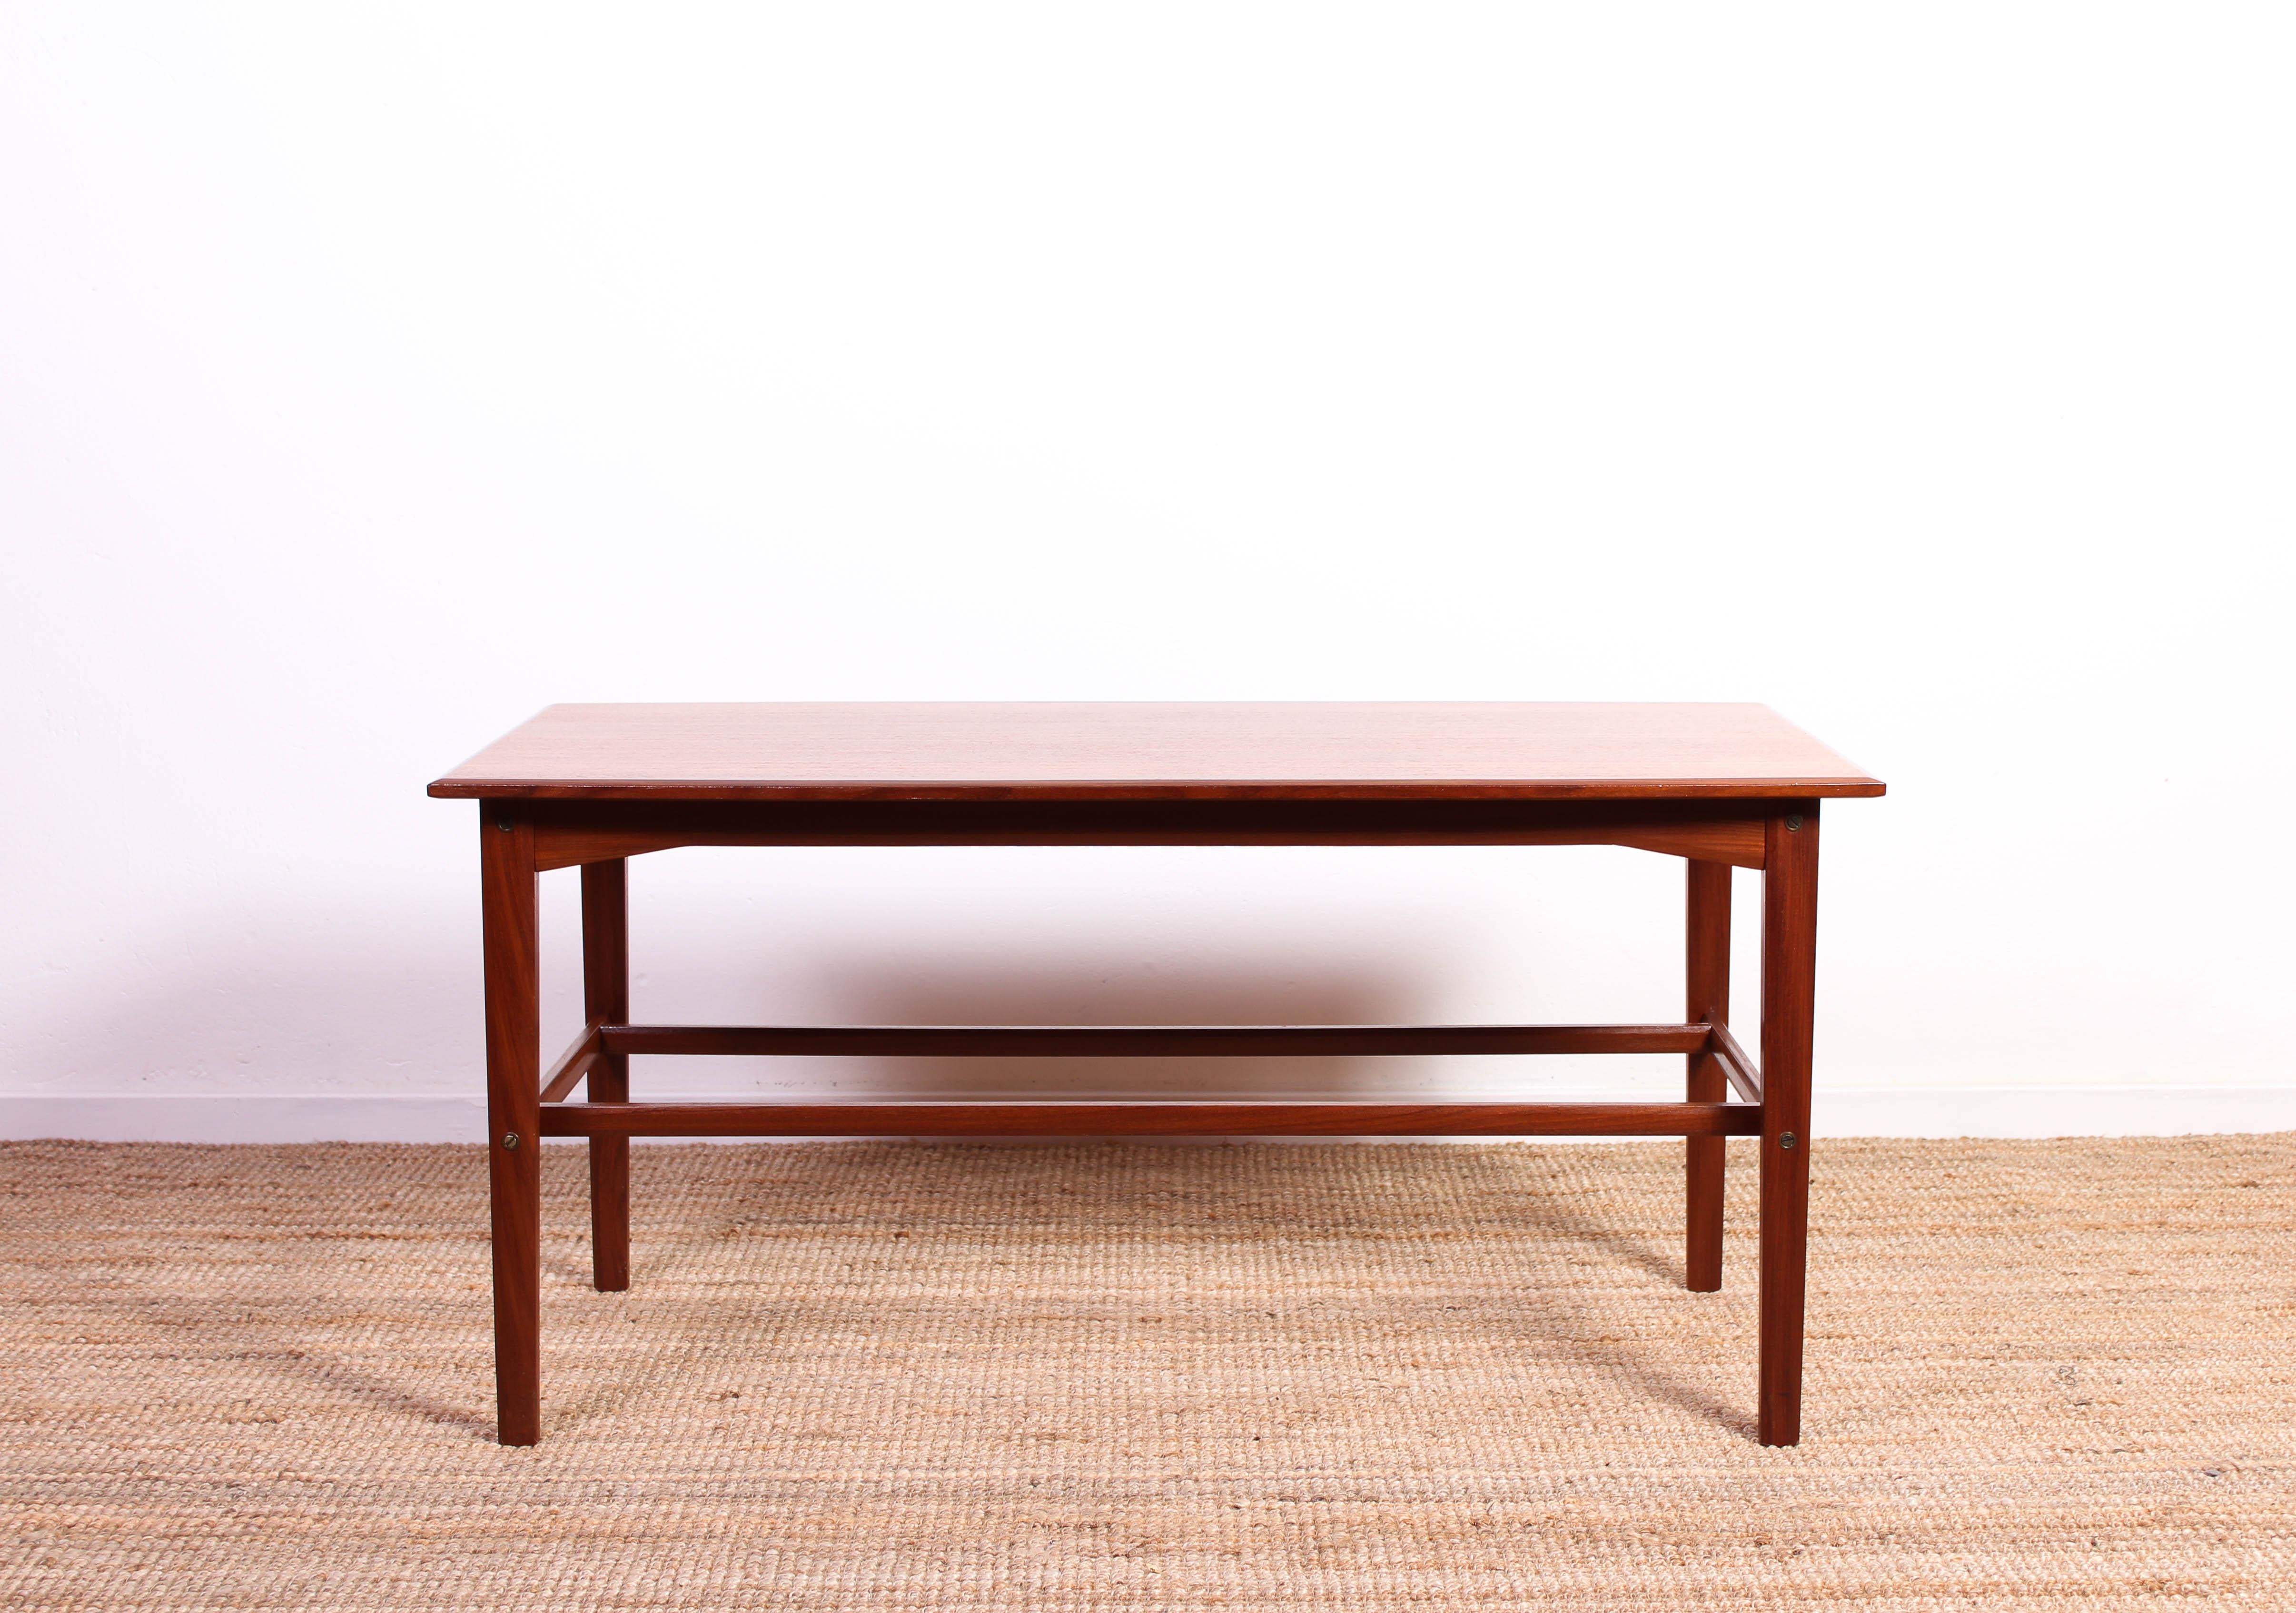 Midcentury coffee table by unknown designer. The table is of high quality with to removable teak trays underneath the tabletop. Produced in Denmark in the 1950s.

Very good vintage condition with little signs of usage consistent with age.